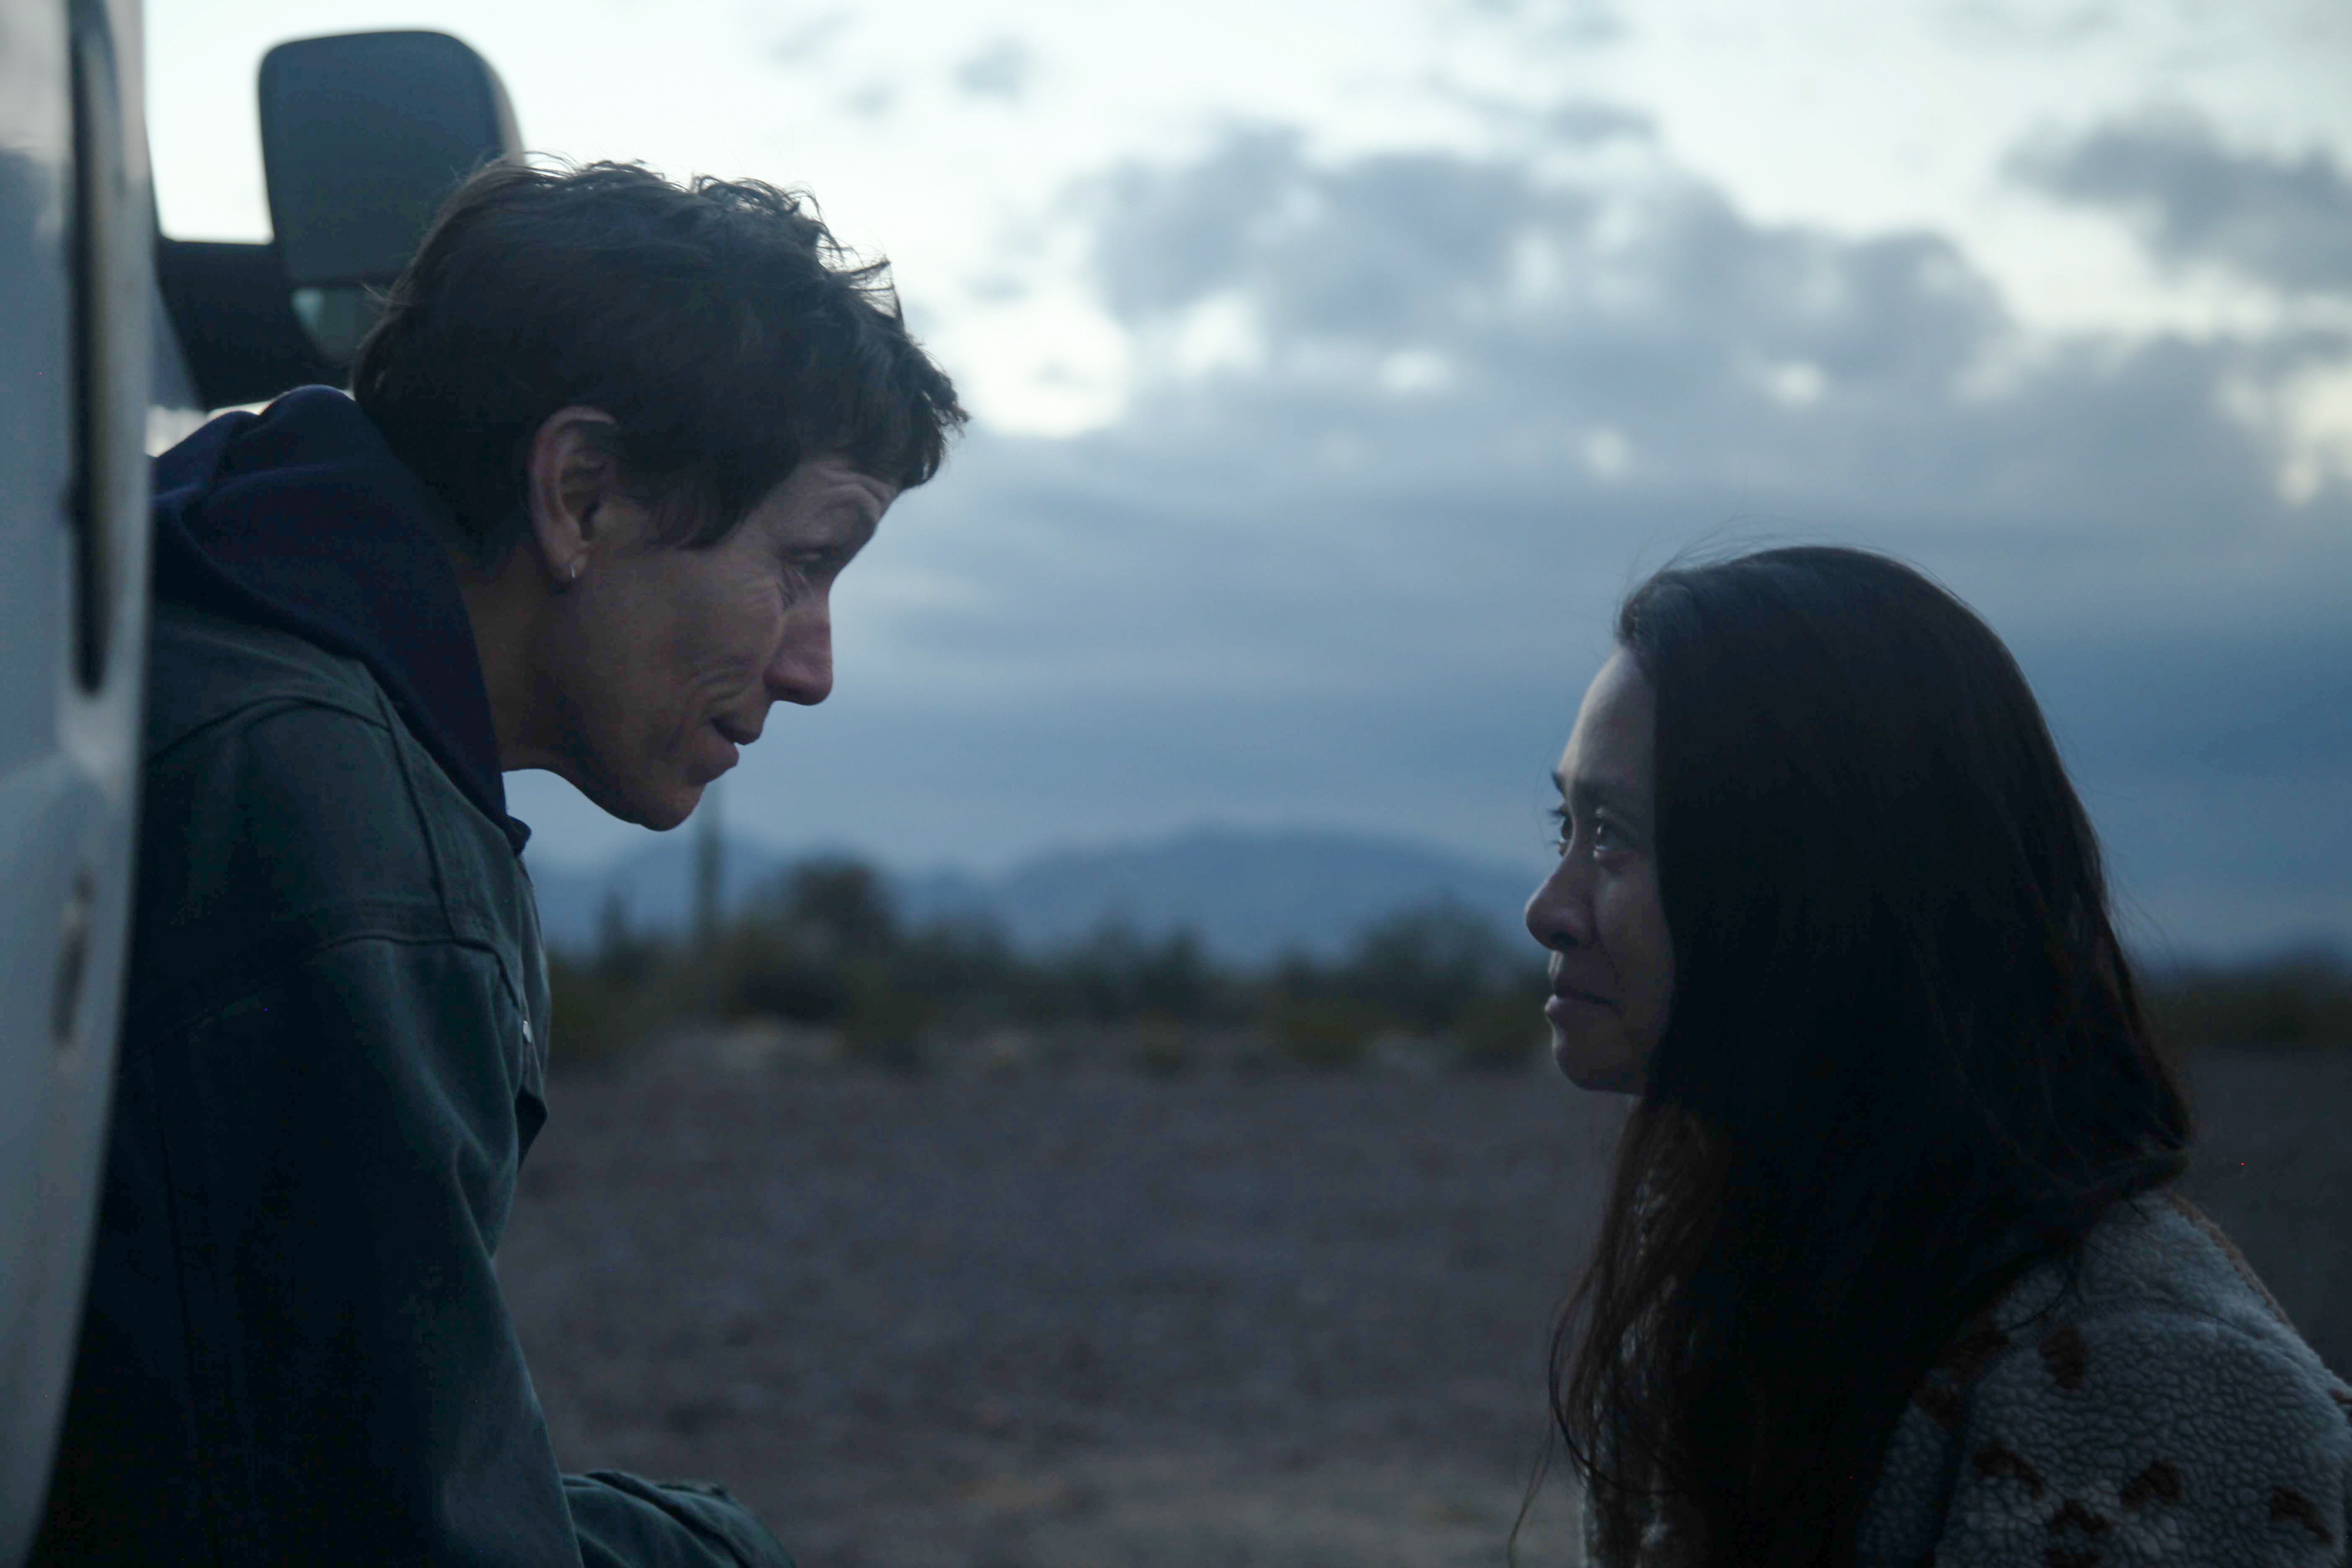 Chloé Zhao + ‘Nomadland’ Triumph in Top Categories at 93rd Academy Awards